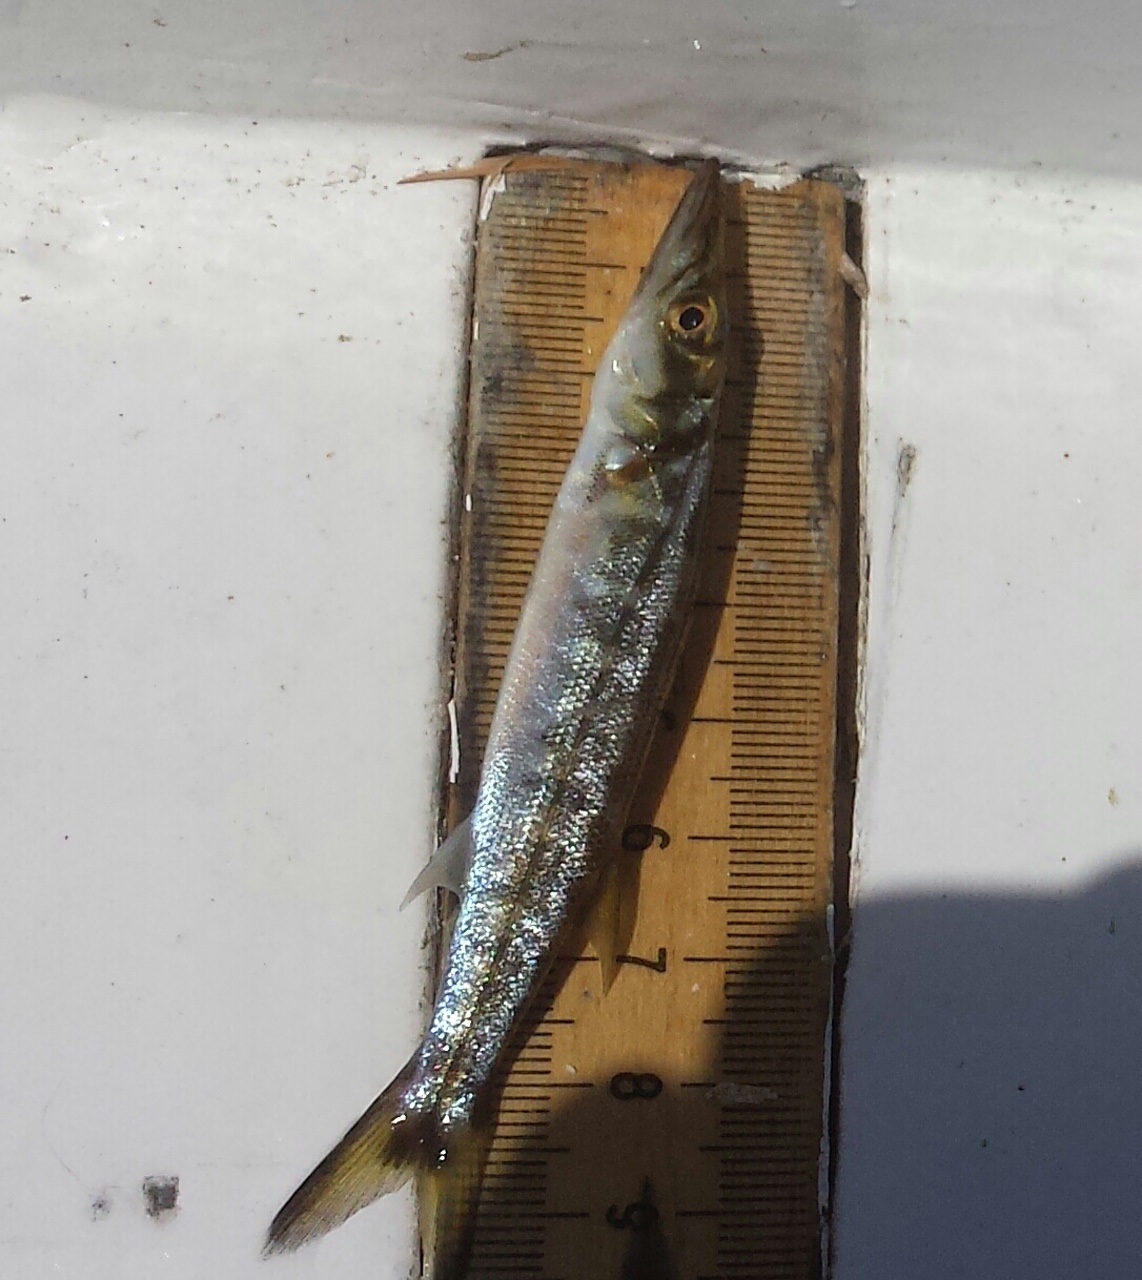 A juvenile barracuda, one of the sport fish targeted in the study, is measured and recorded. Image credit: NOAA